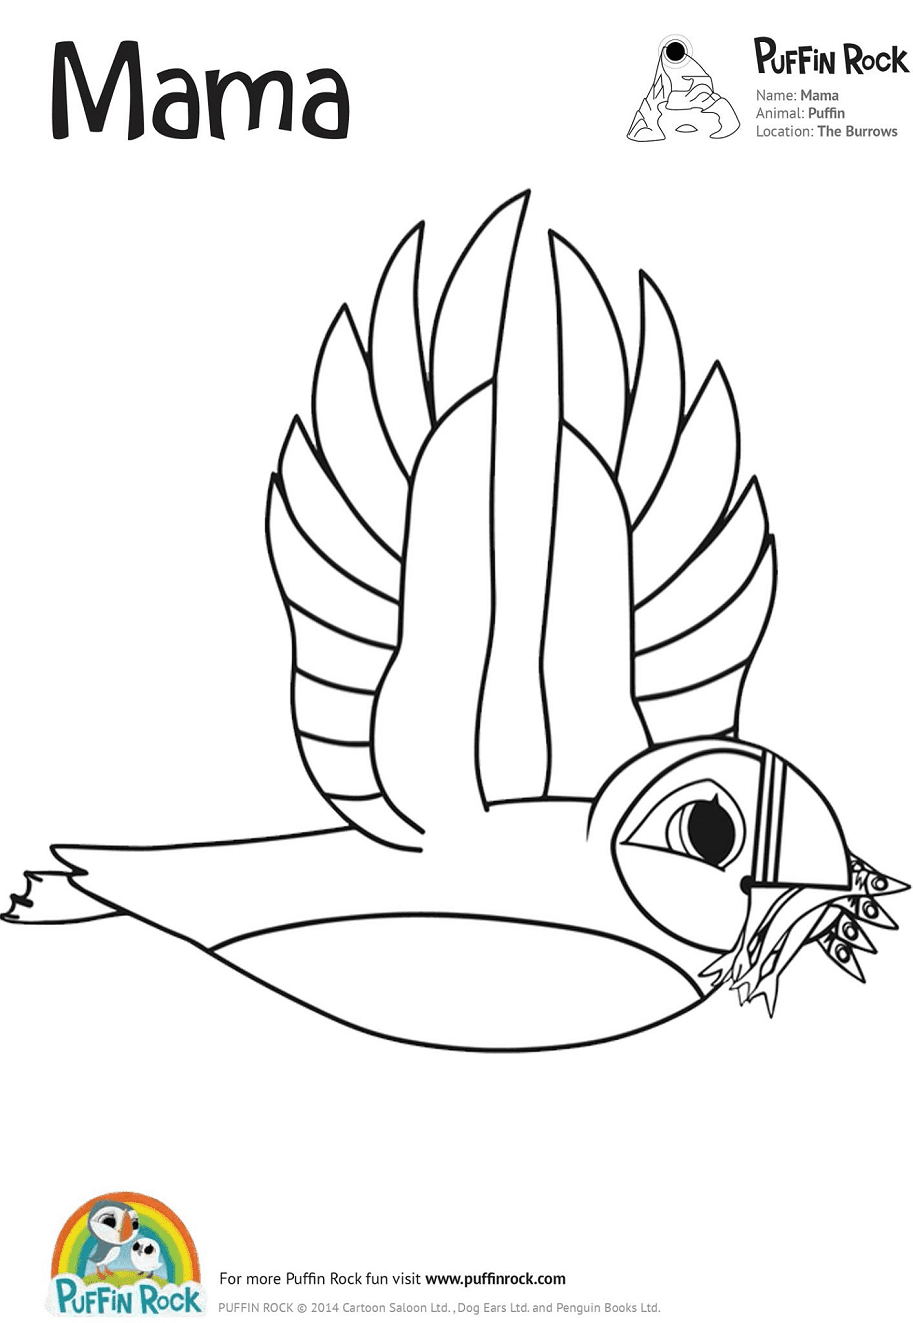 Mama from Puffin Rock Coloring Page